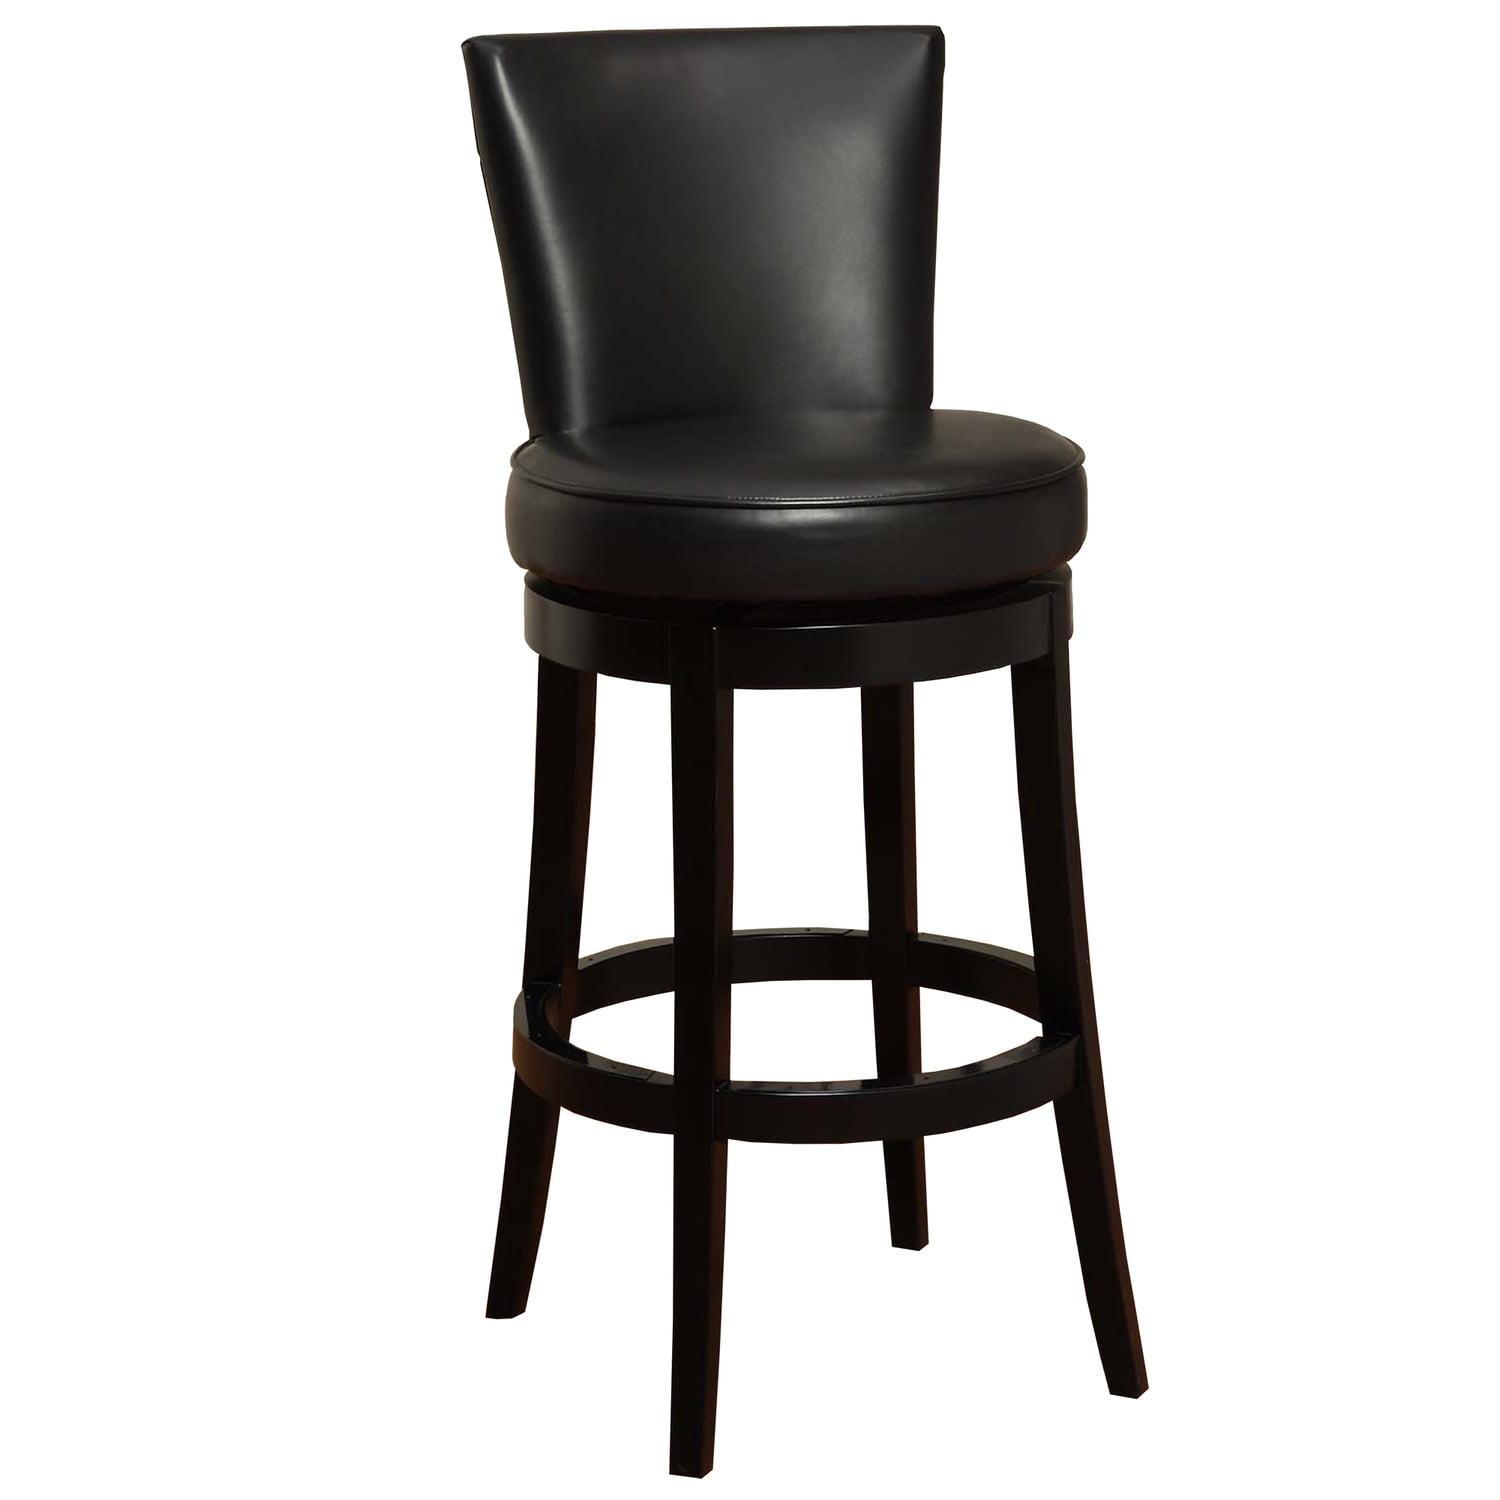 Transitional Black Leather Swivel Barstool with Nailhead Accents